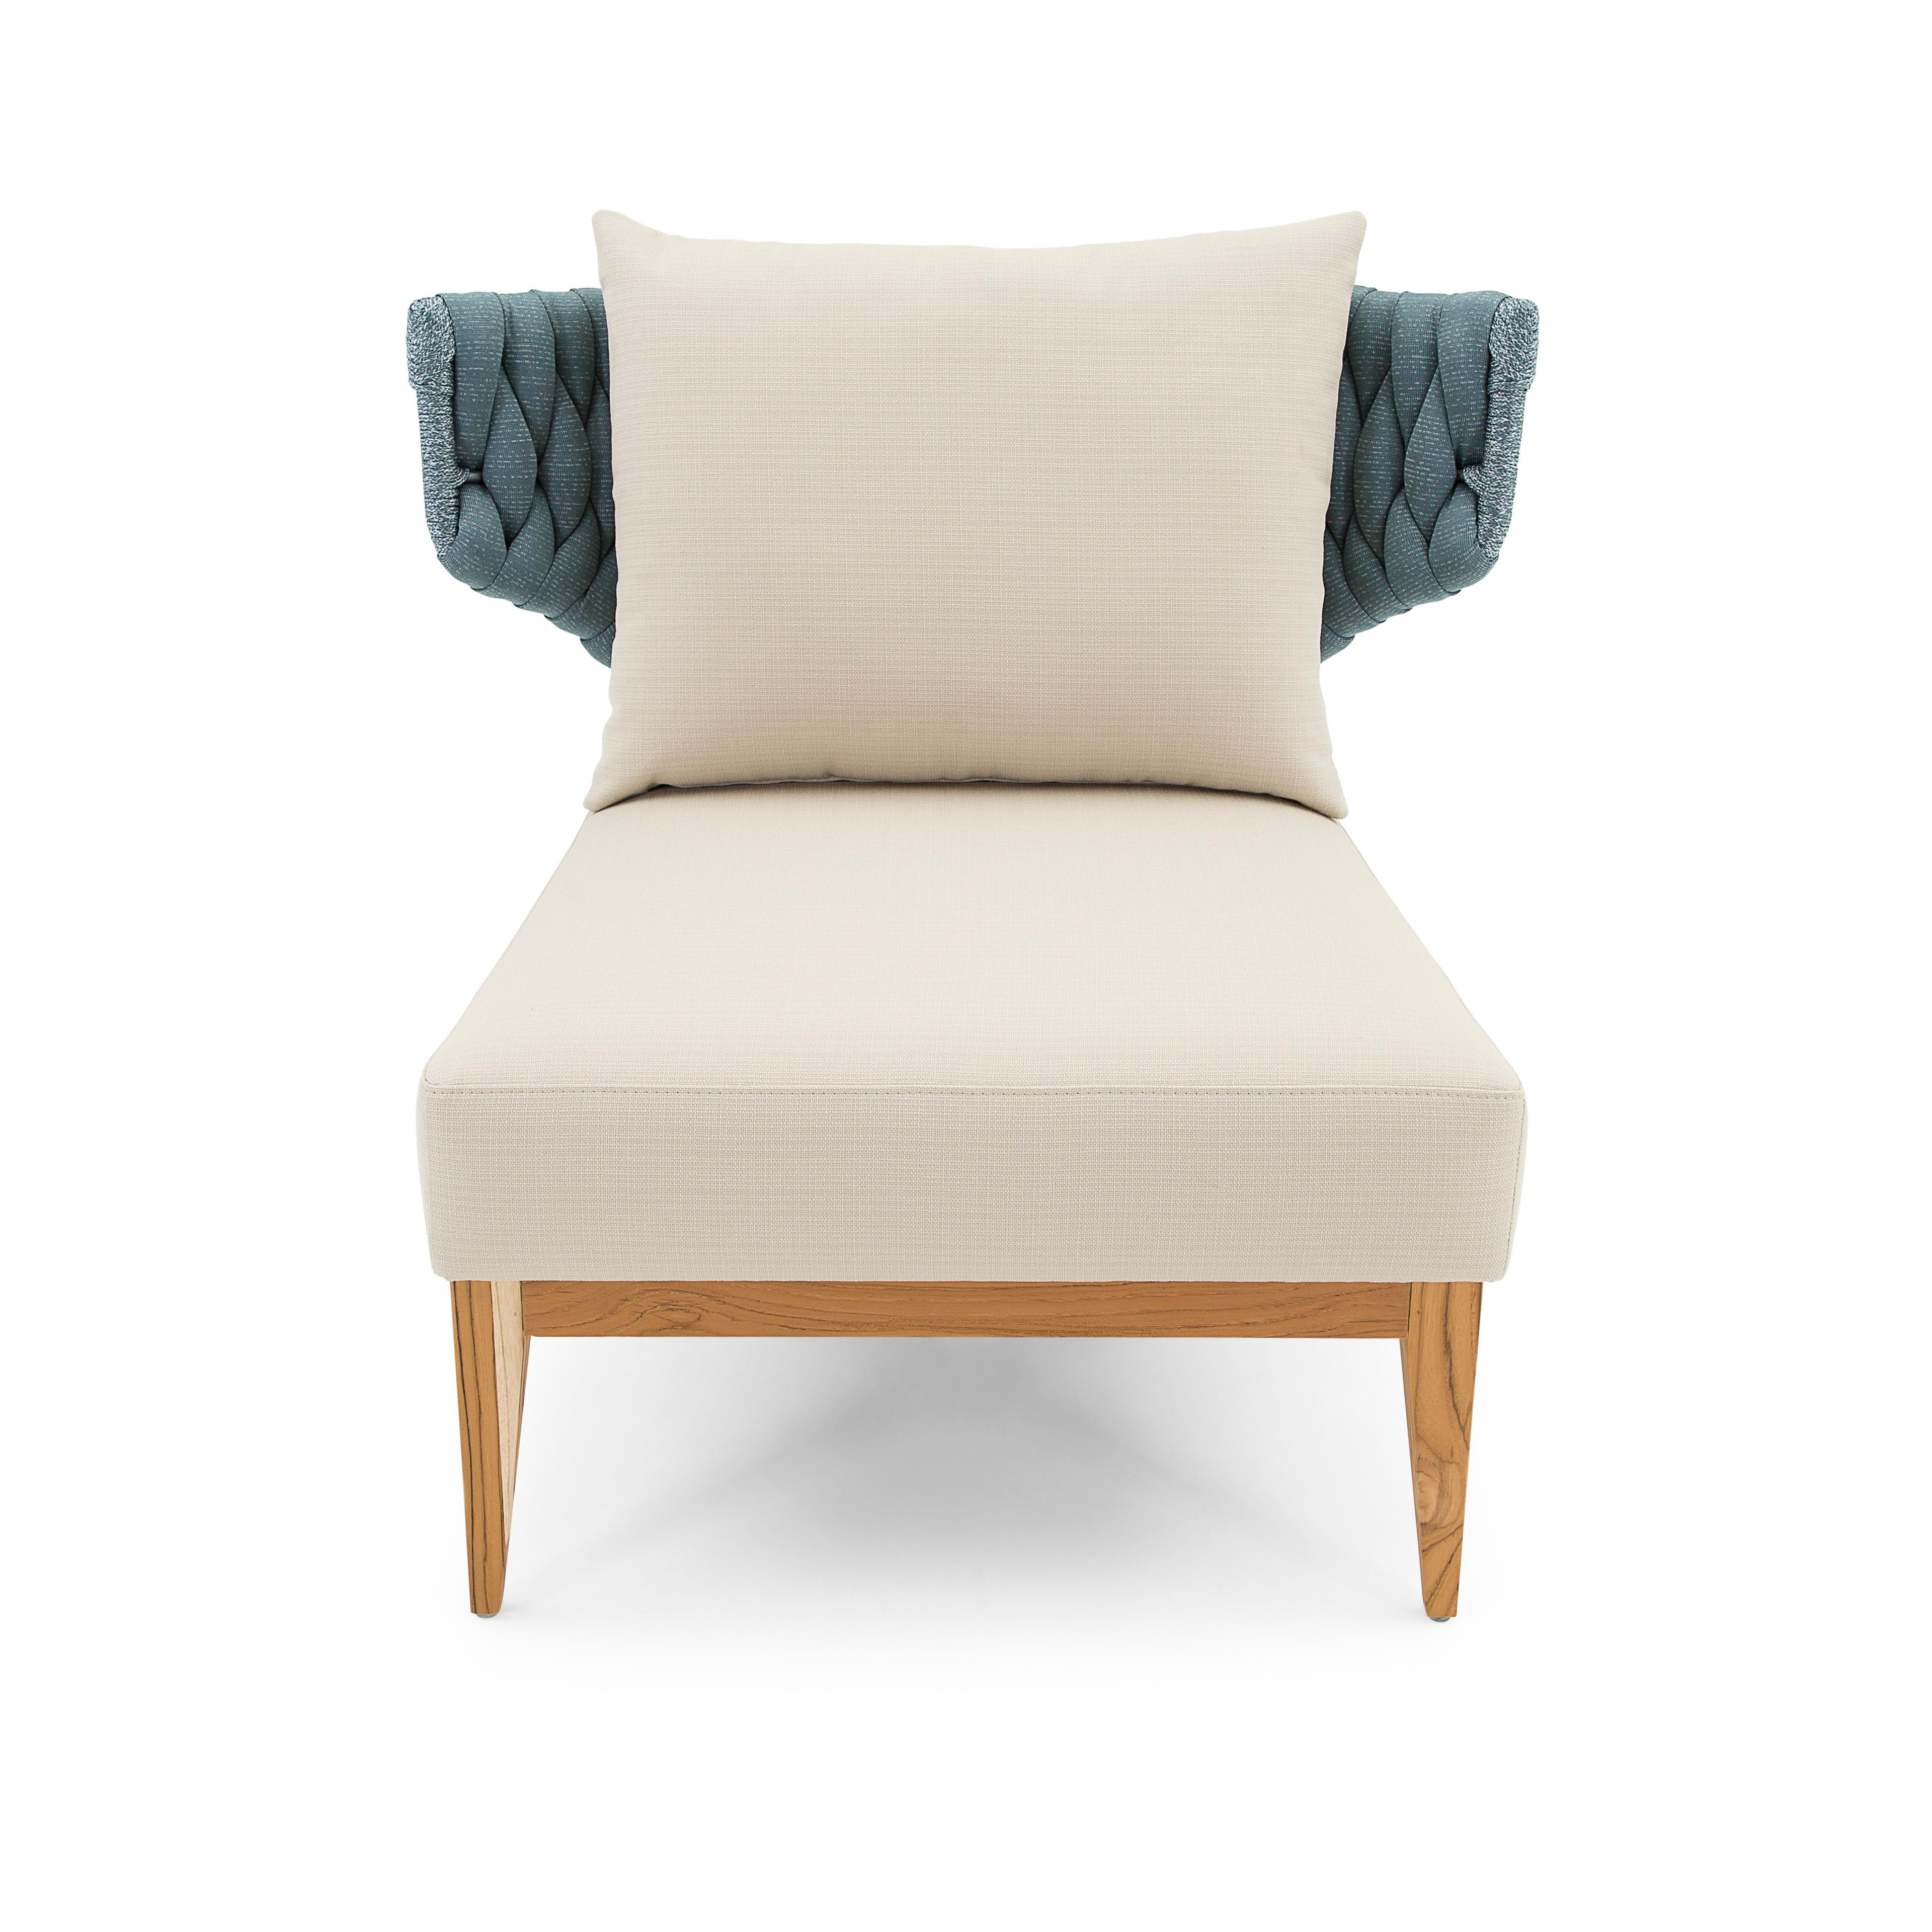 Beluga Outdoor Armchair in Beige and Blue fabric and Teak wood For Sale 2